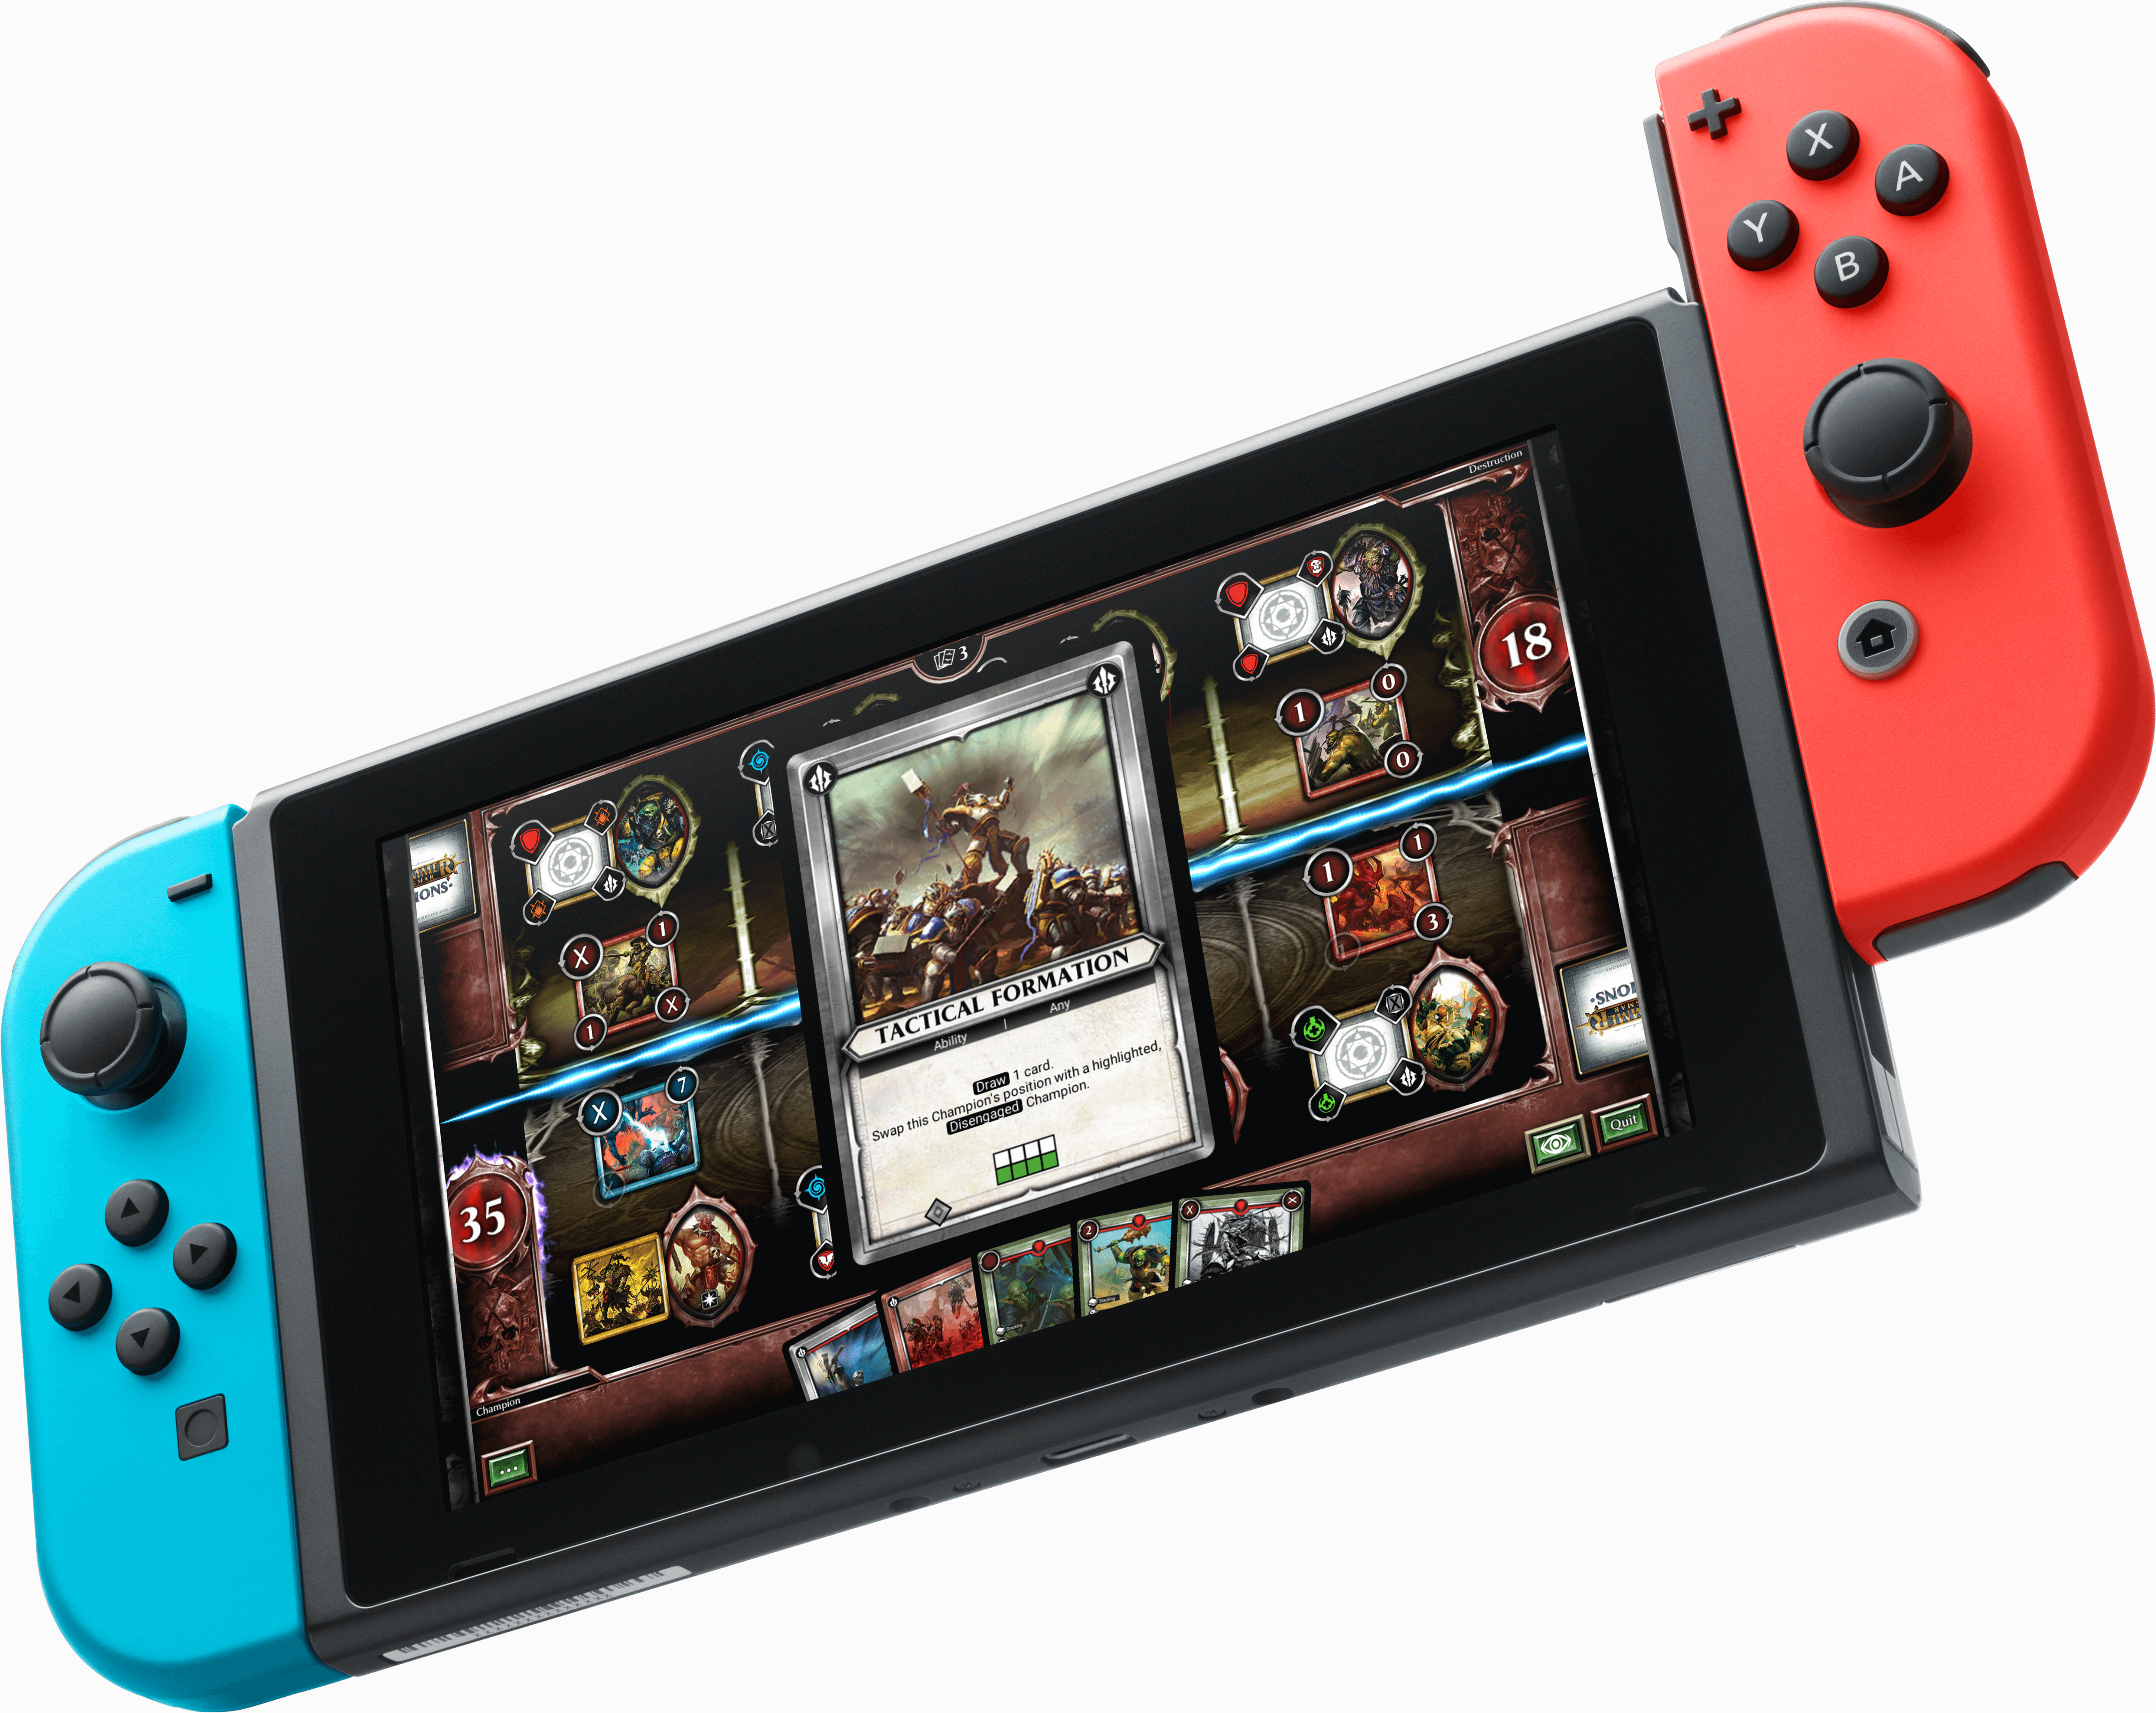 http://www.cosmocover.com/wp-content/uploads/2019/04/Nintendo-Switch-Screen-1.png